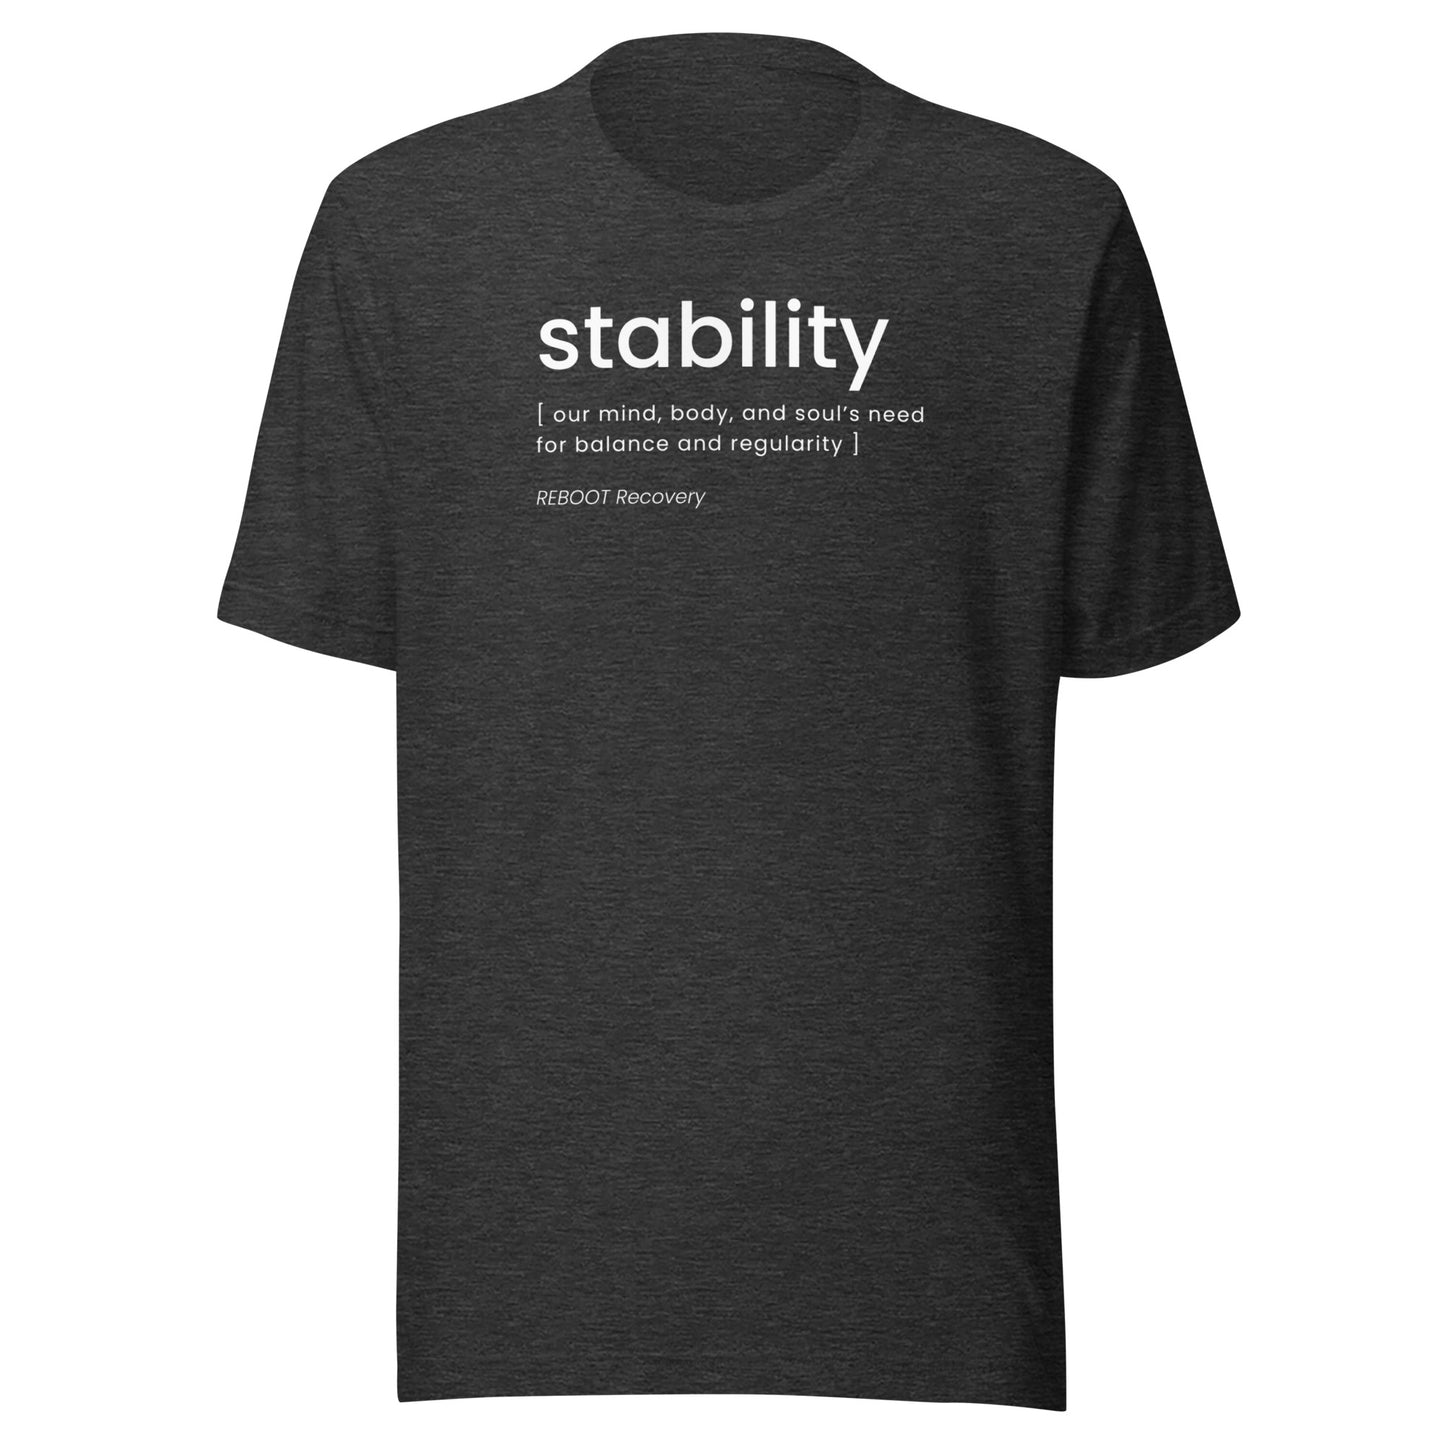 SESSION 11: Stability T-Shirt